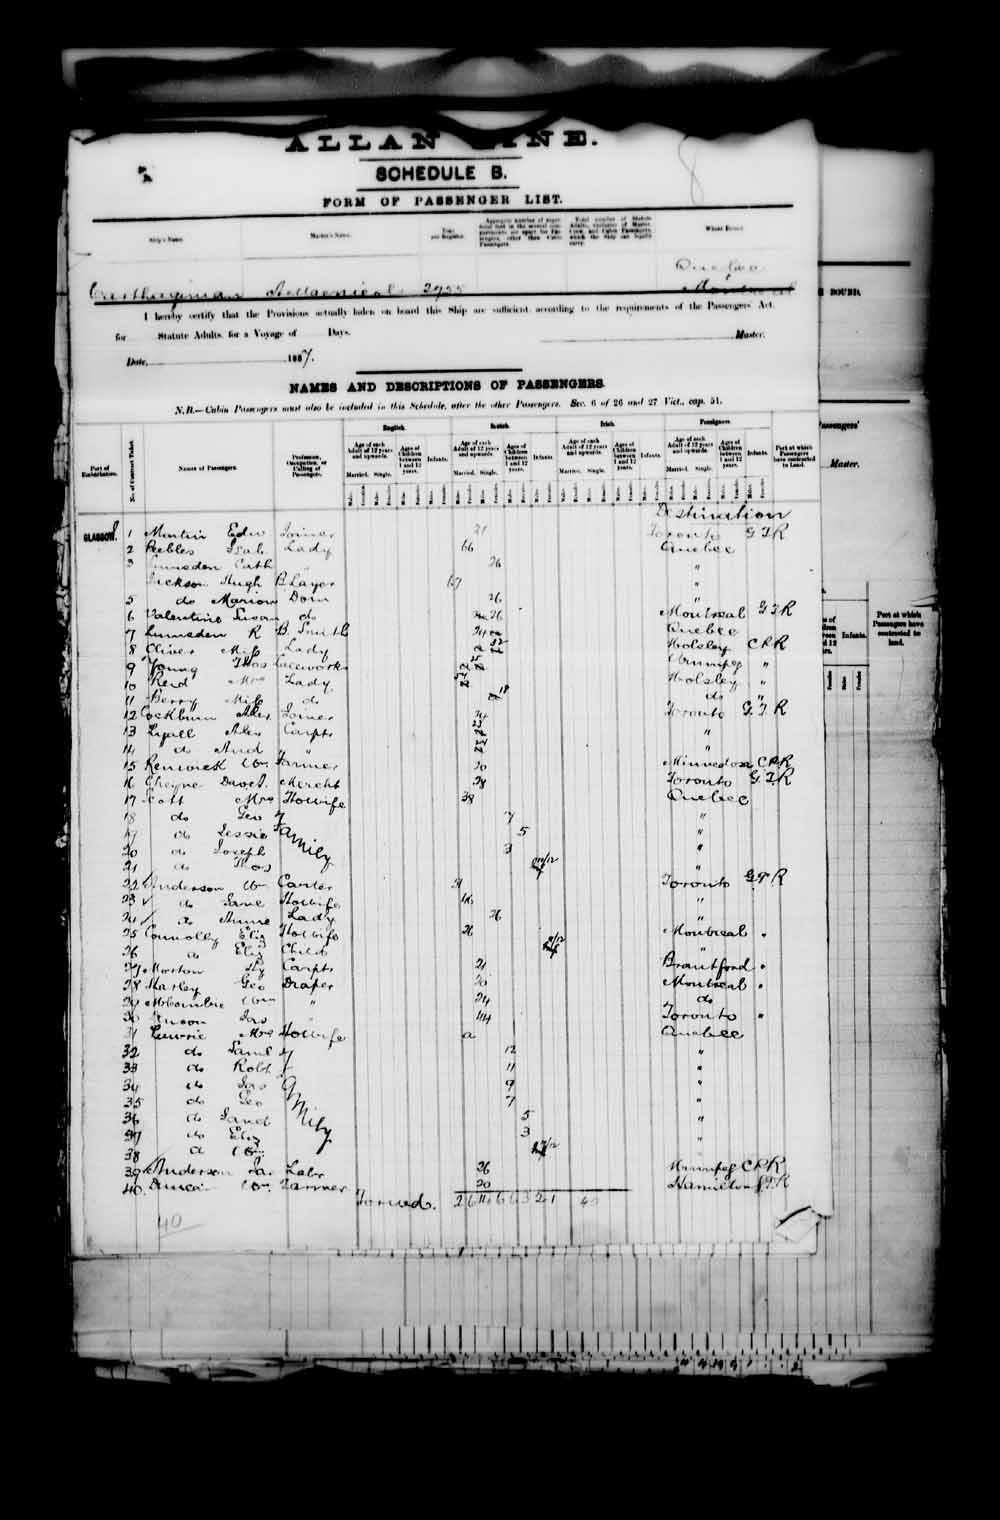 Digitized page of Quebec Passenger Lists for Image No.: e003546728